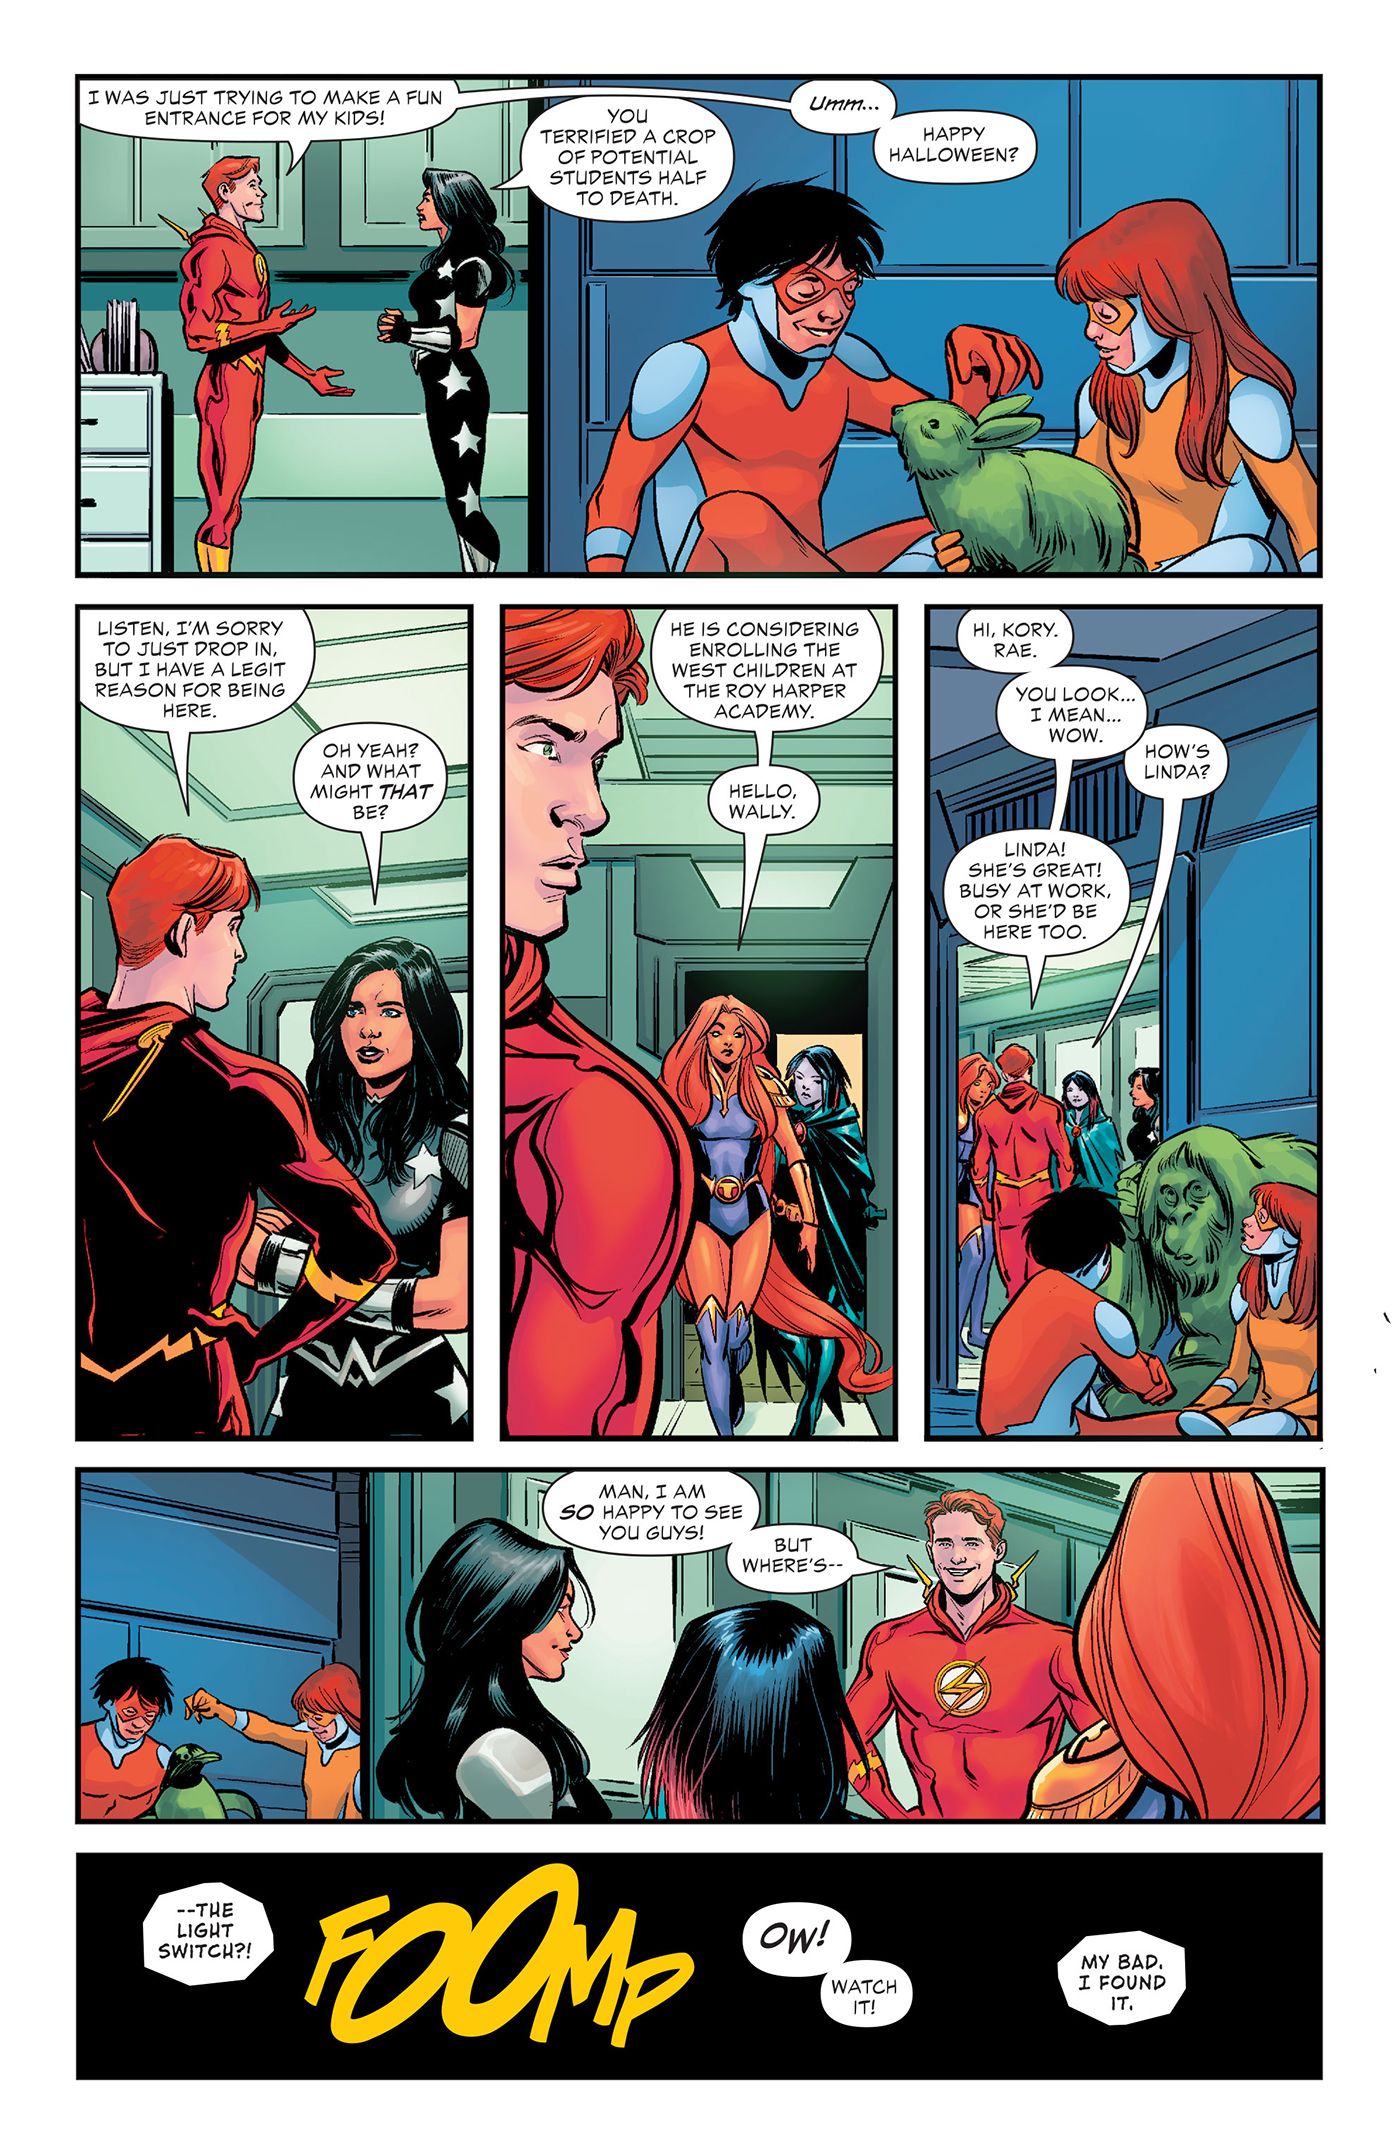 Wally talks to the academy's faculty while Jai and Irey play with Beast Boy.